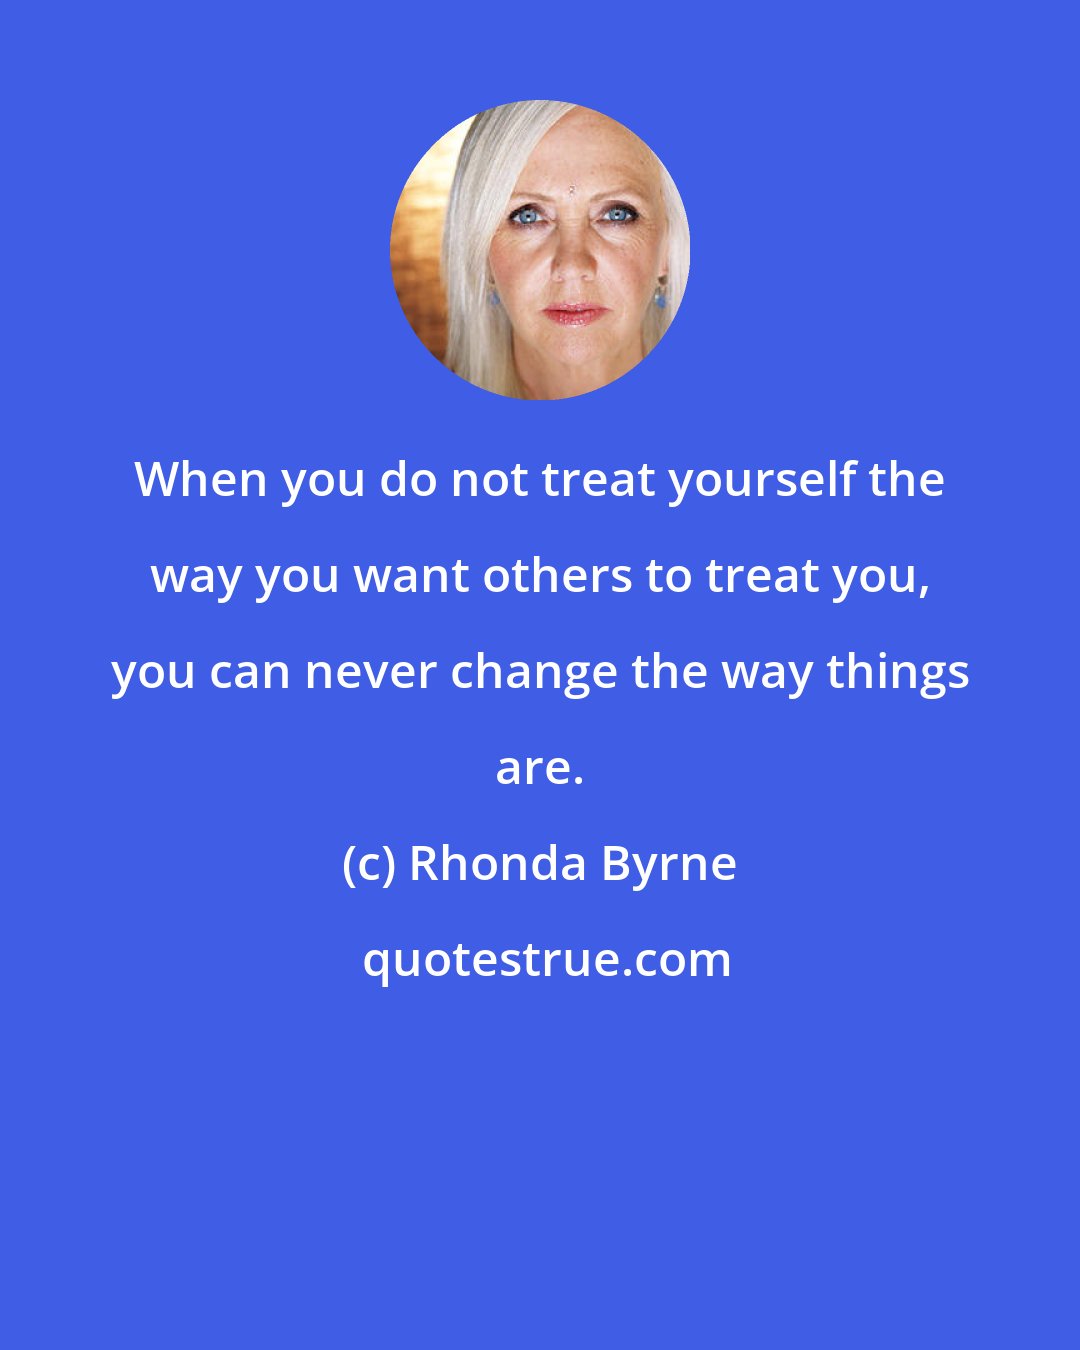 Rhonda Byrne: When you do not treat yourself the way you want others to treat you, you can never change the way things are.